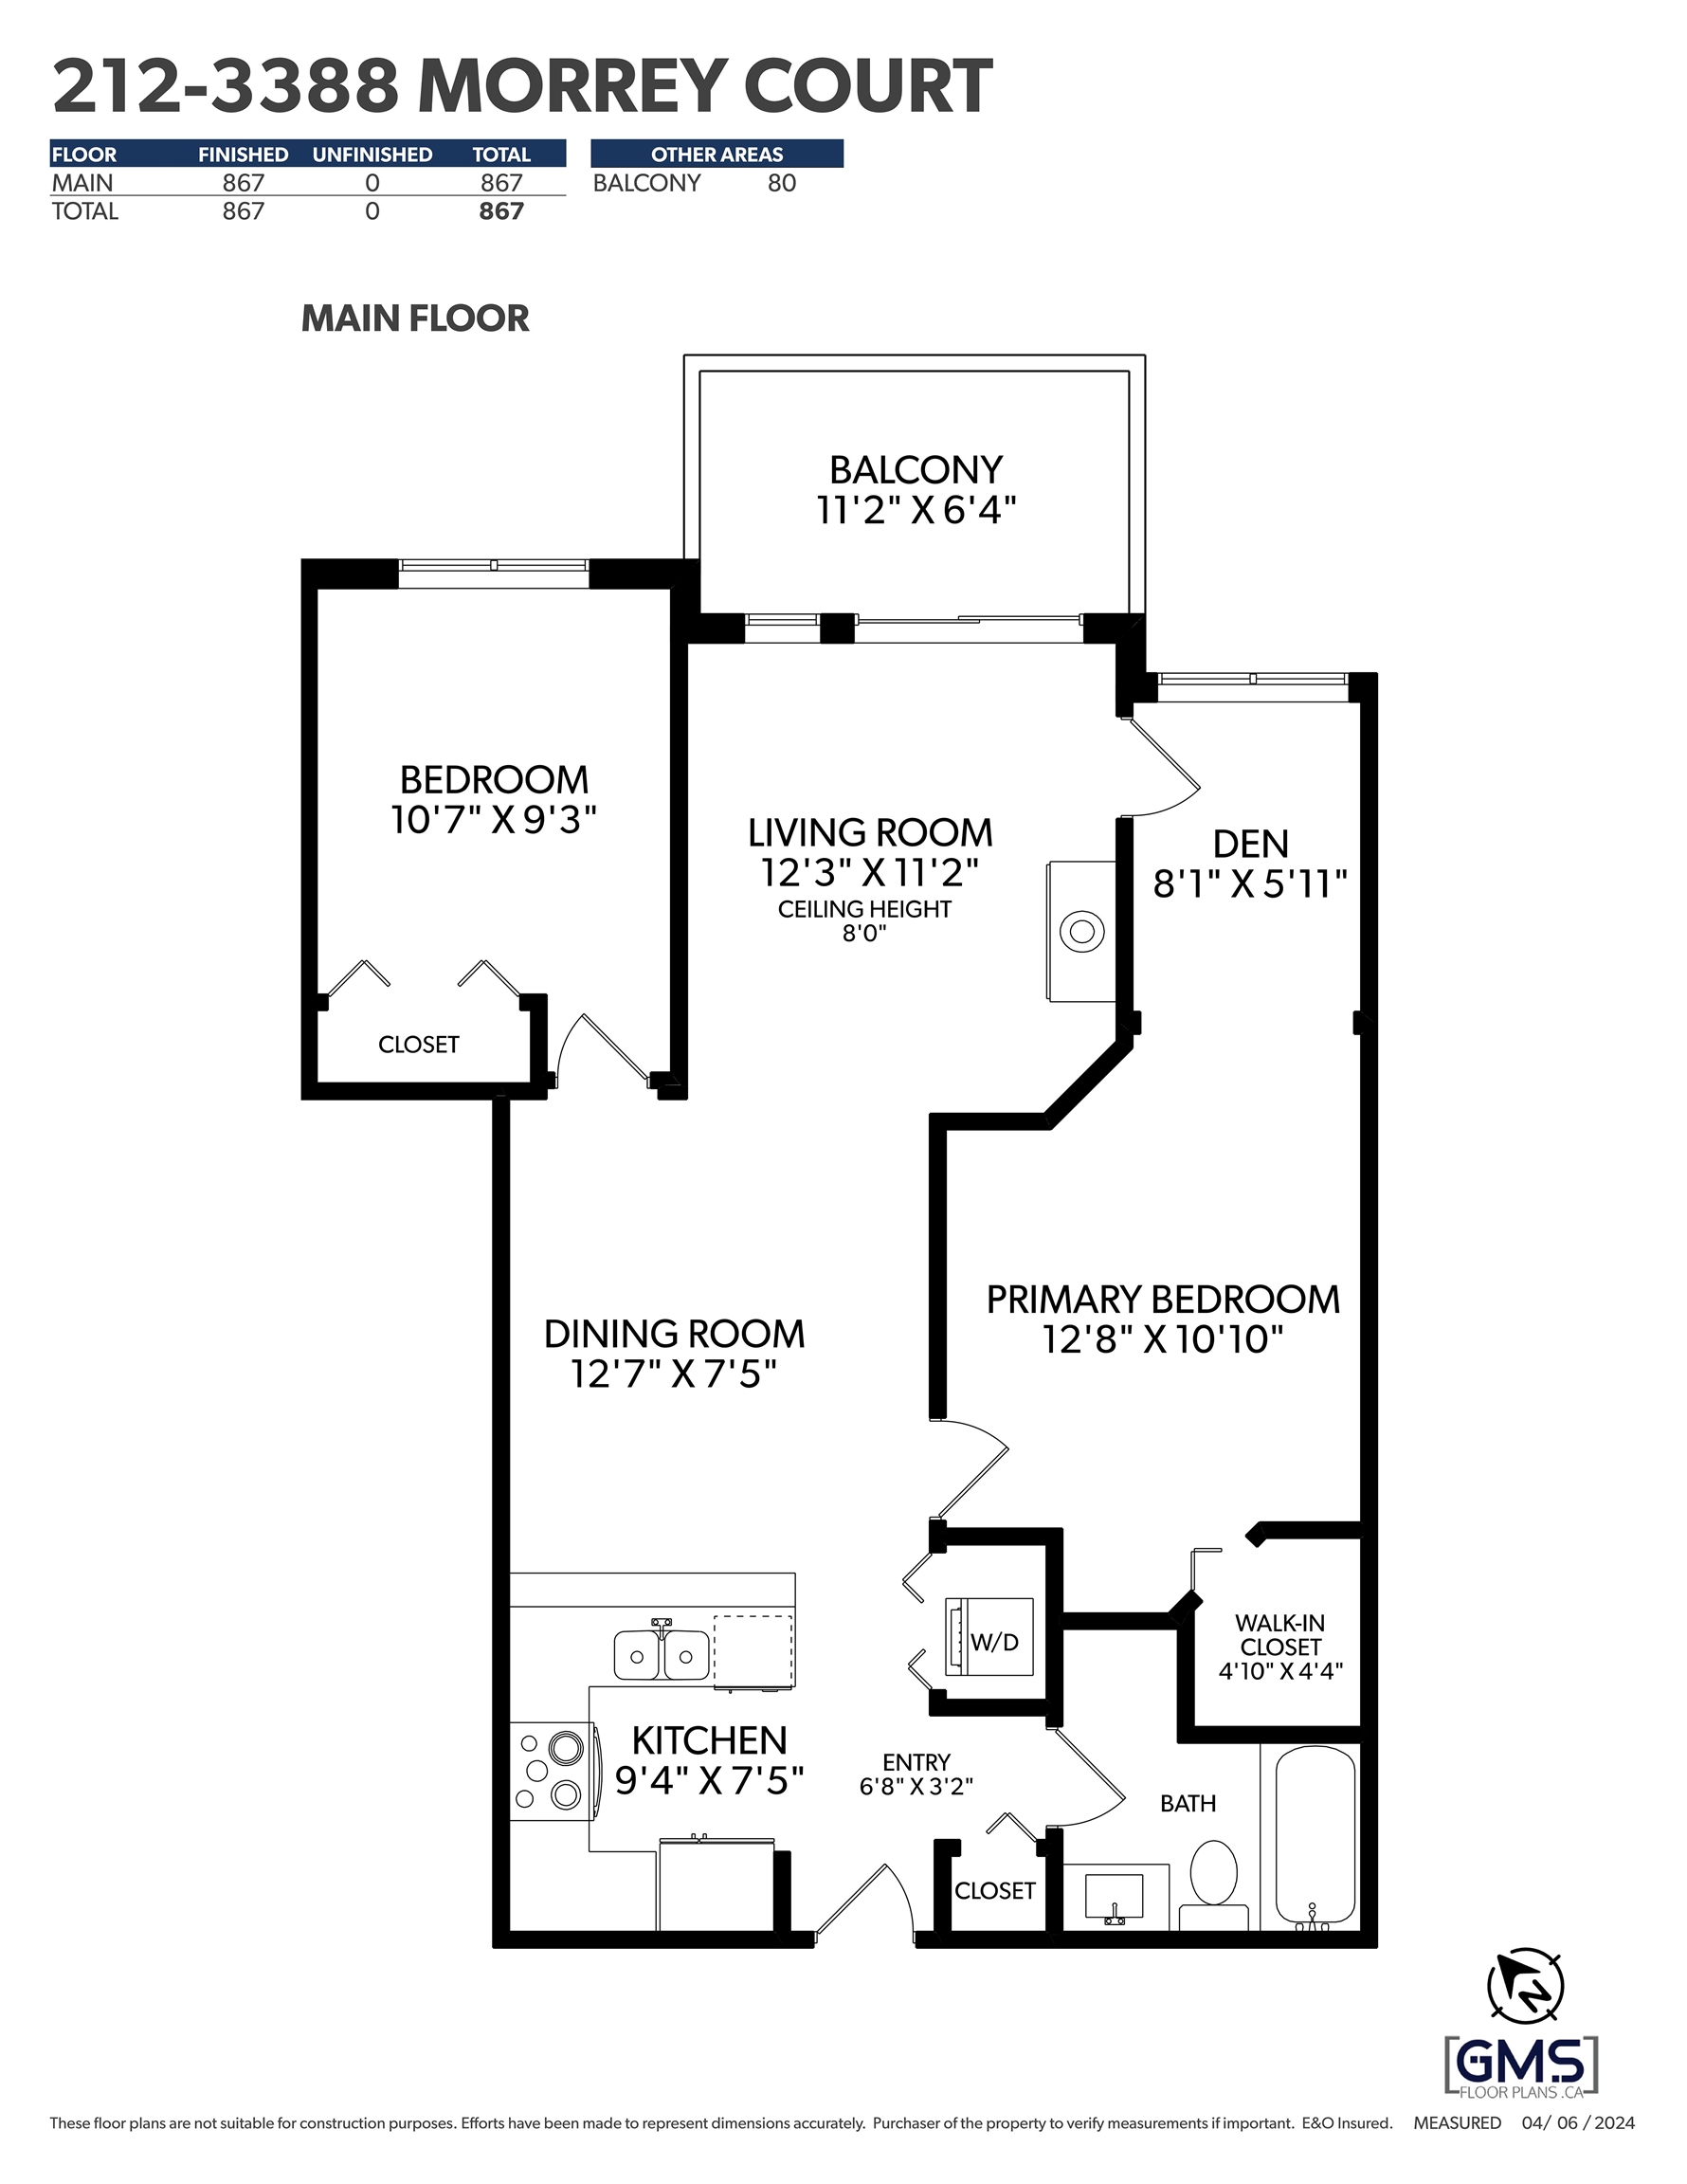 Listing image of 212 3388 MORREY COURT